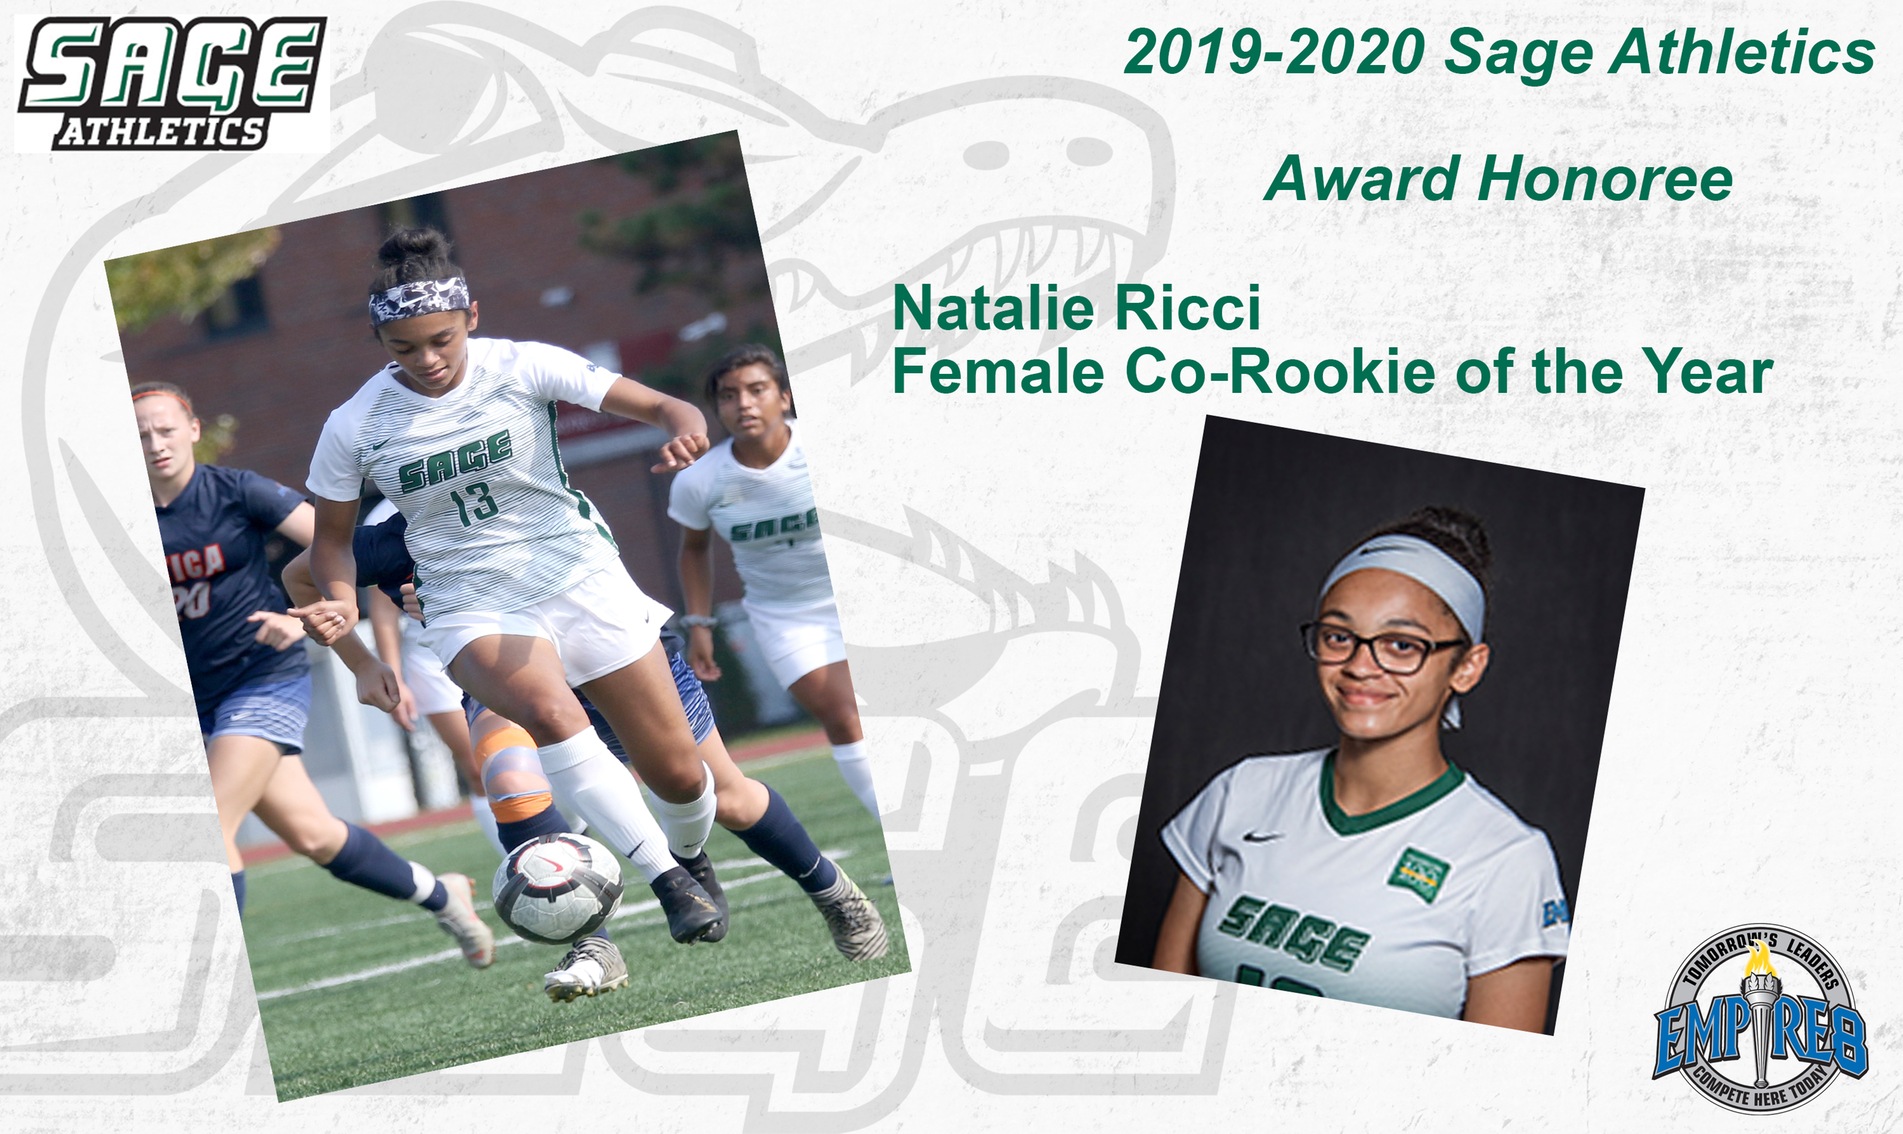 Sage selects Natalie Ricci as Female Co-Rookie of the Year